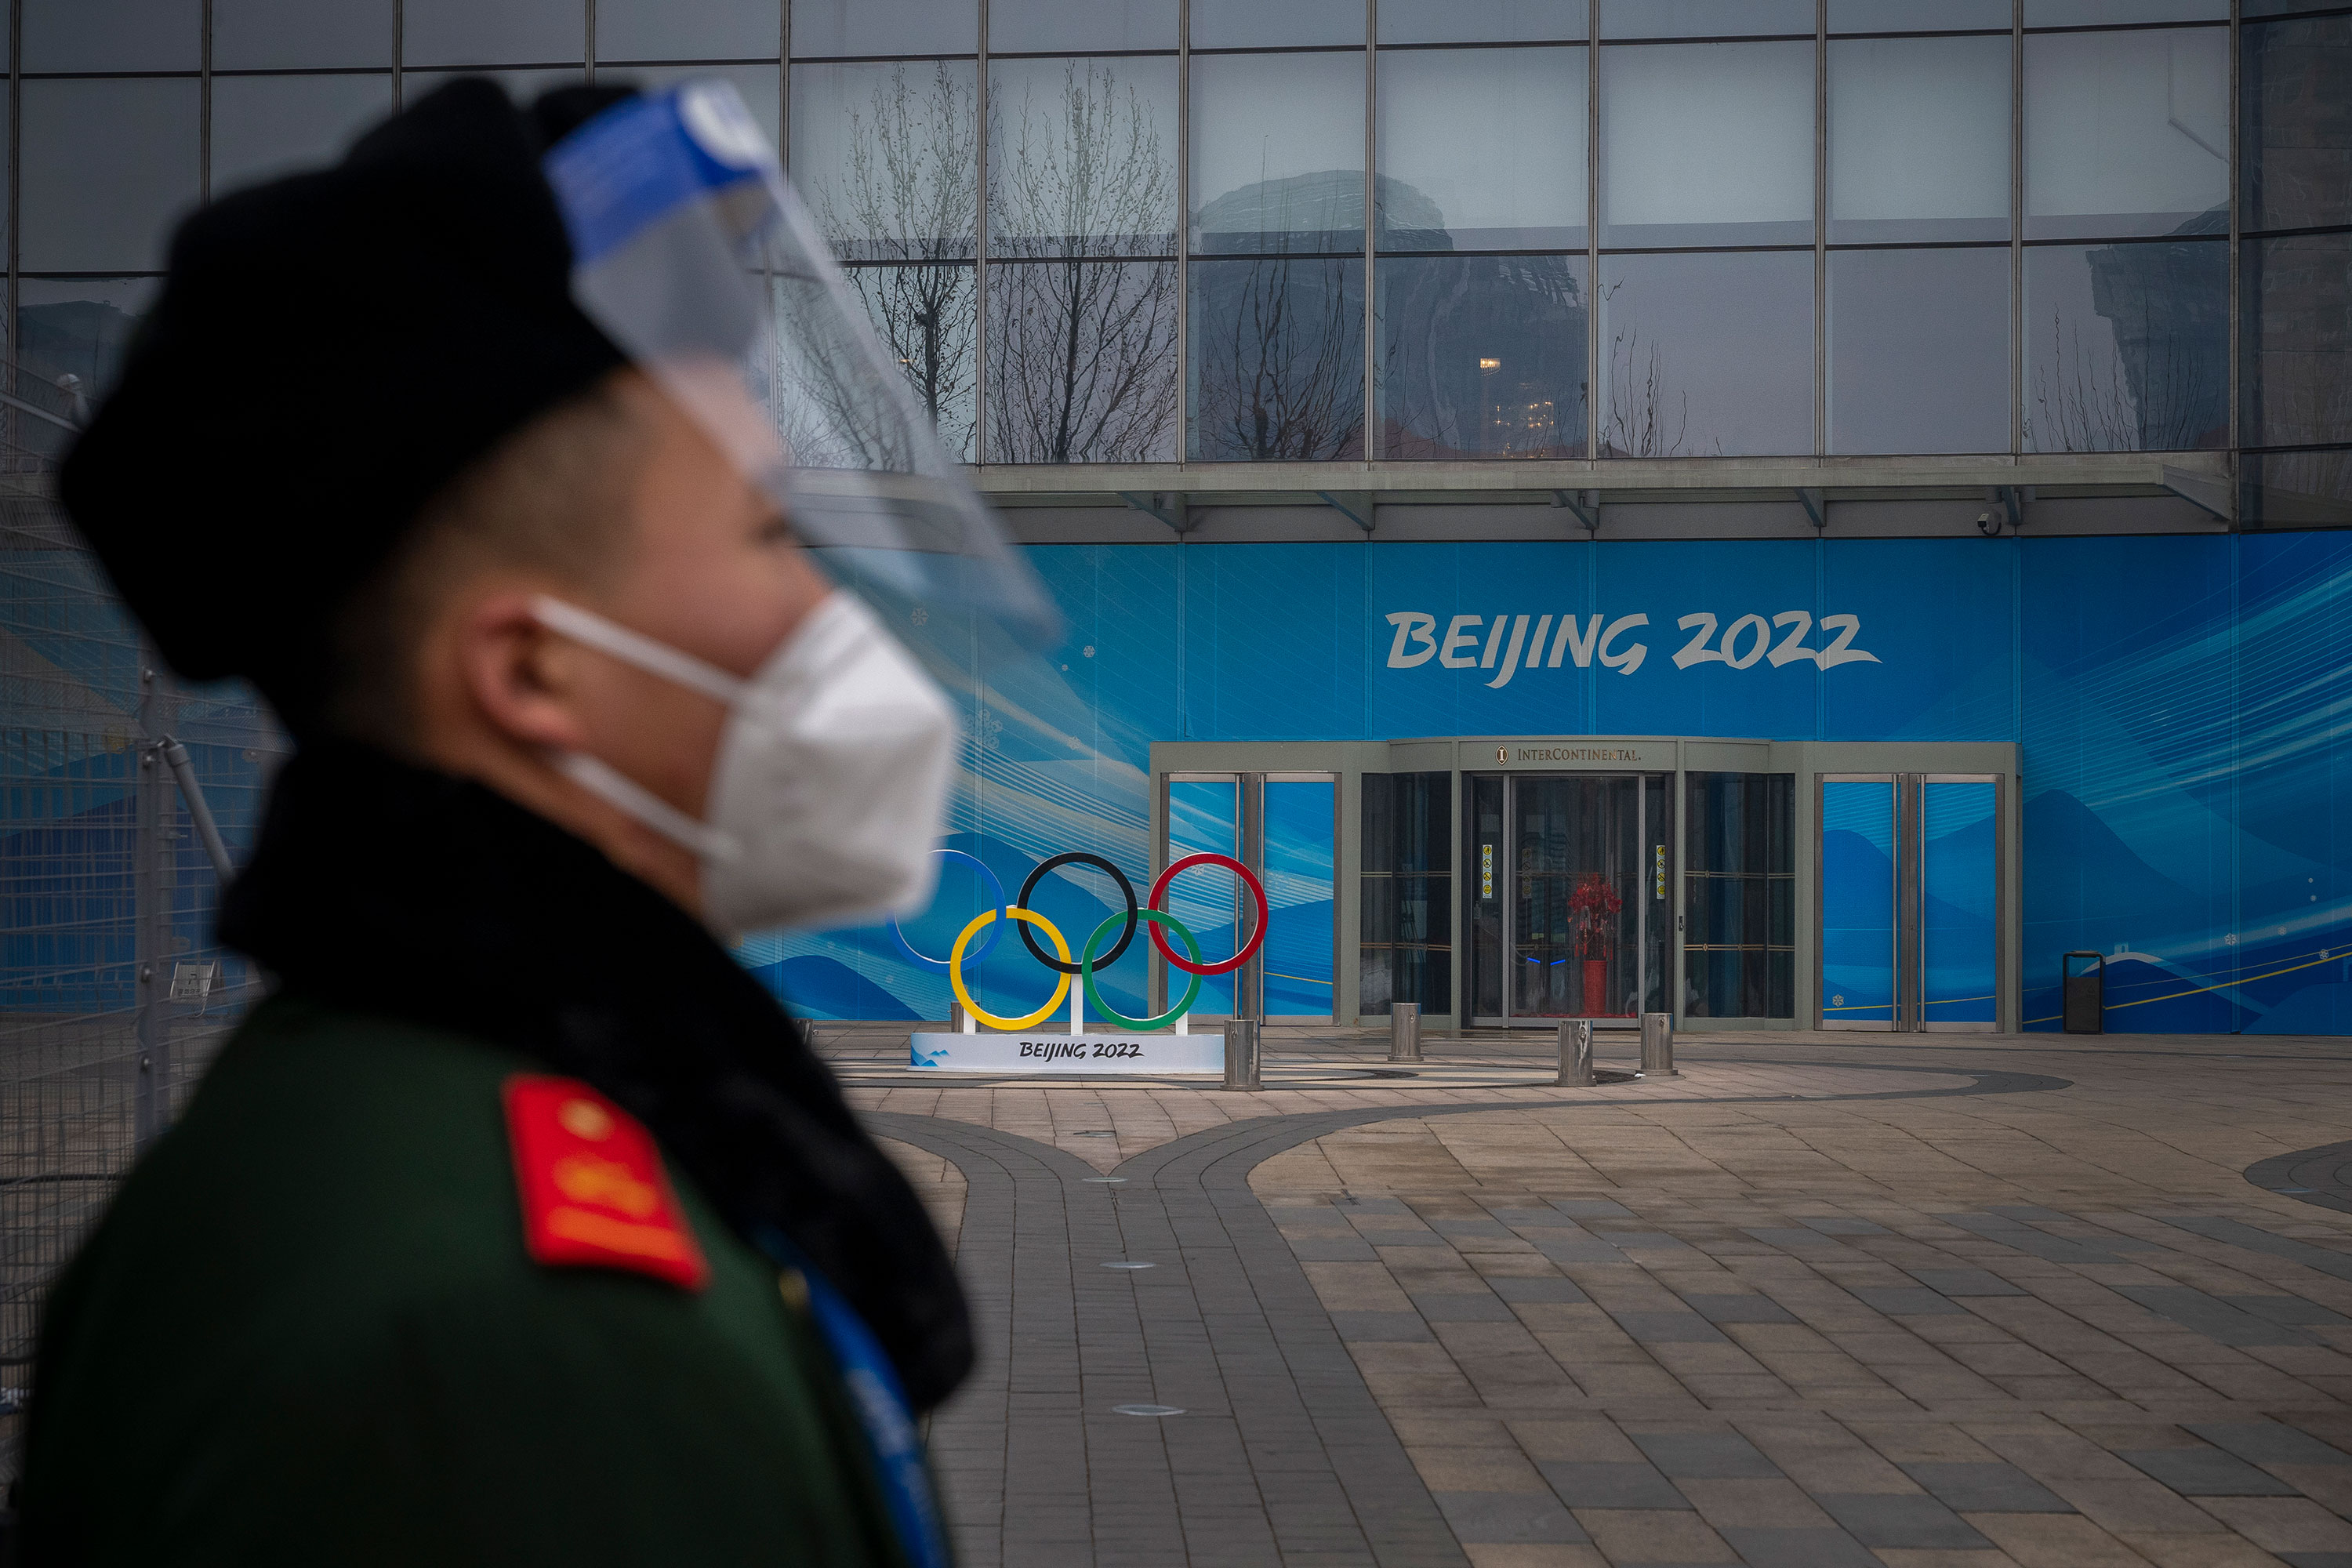 A security guard stands behind a barricade in an area not accessible to the general public at Olympic Park in Beijing on January 23.